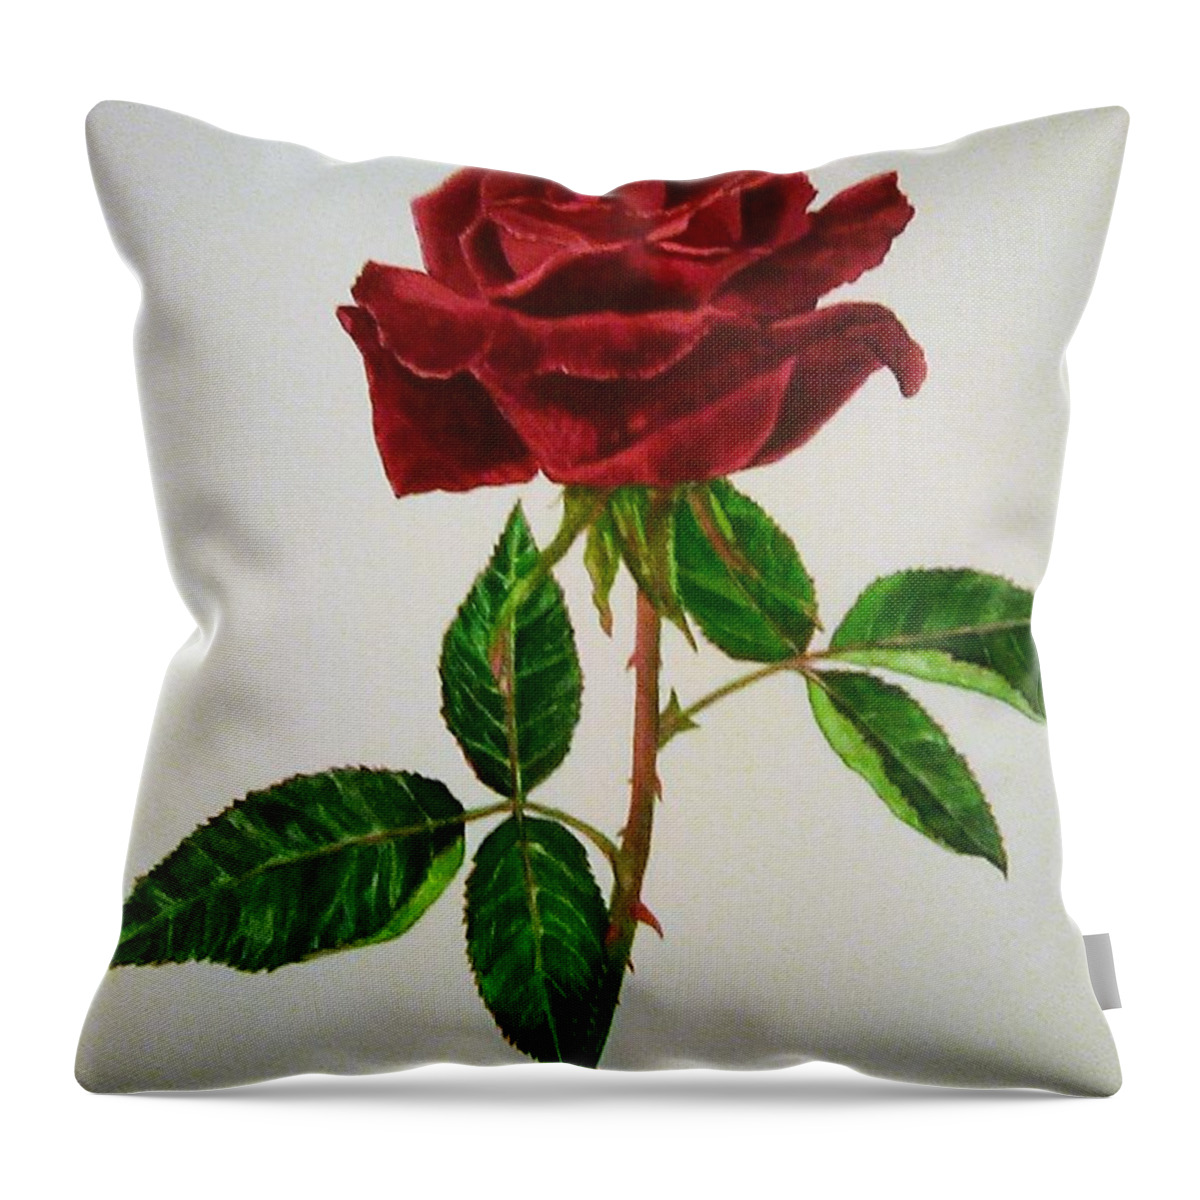 Red Throw Pillow featuring the painting Red Rose by Melissa Joyfully